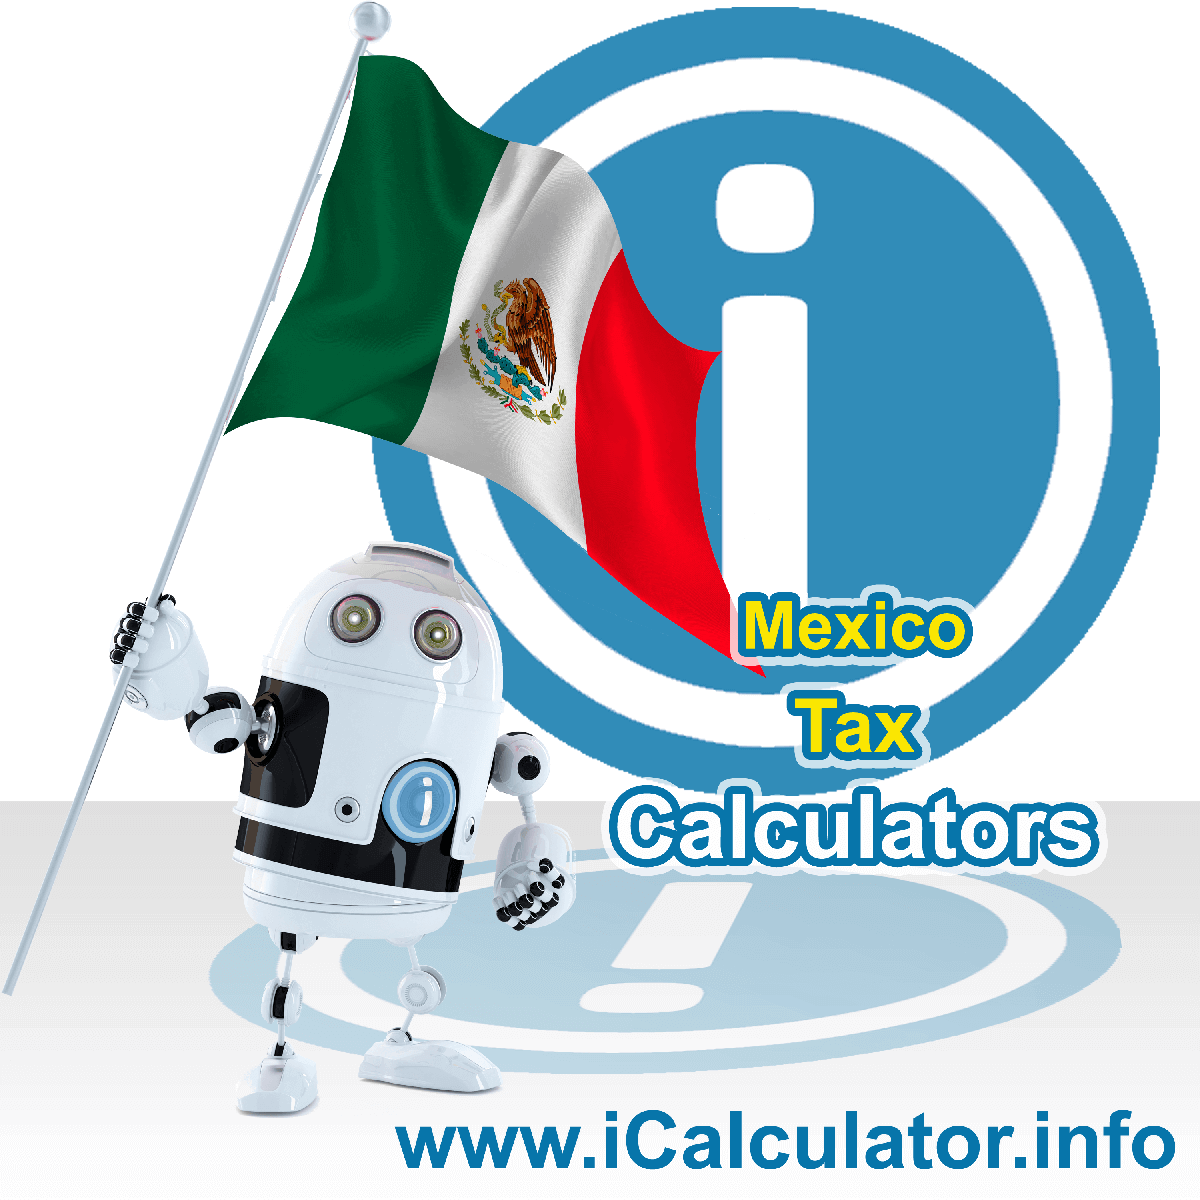 Mexico Tax Calculator. This image shows the Mexico flag and information relating to the tax formula for the Mexico Tax Calculator